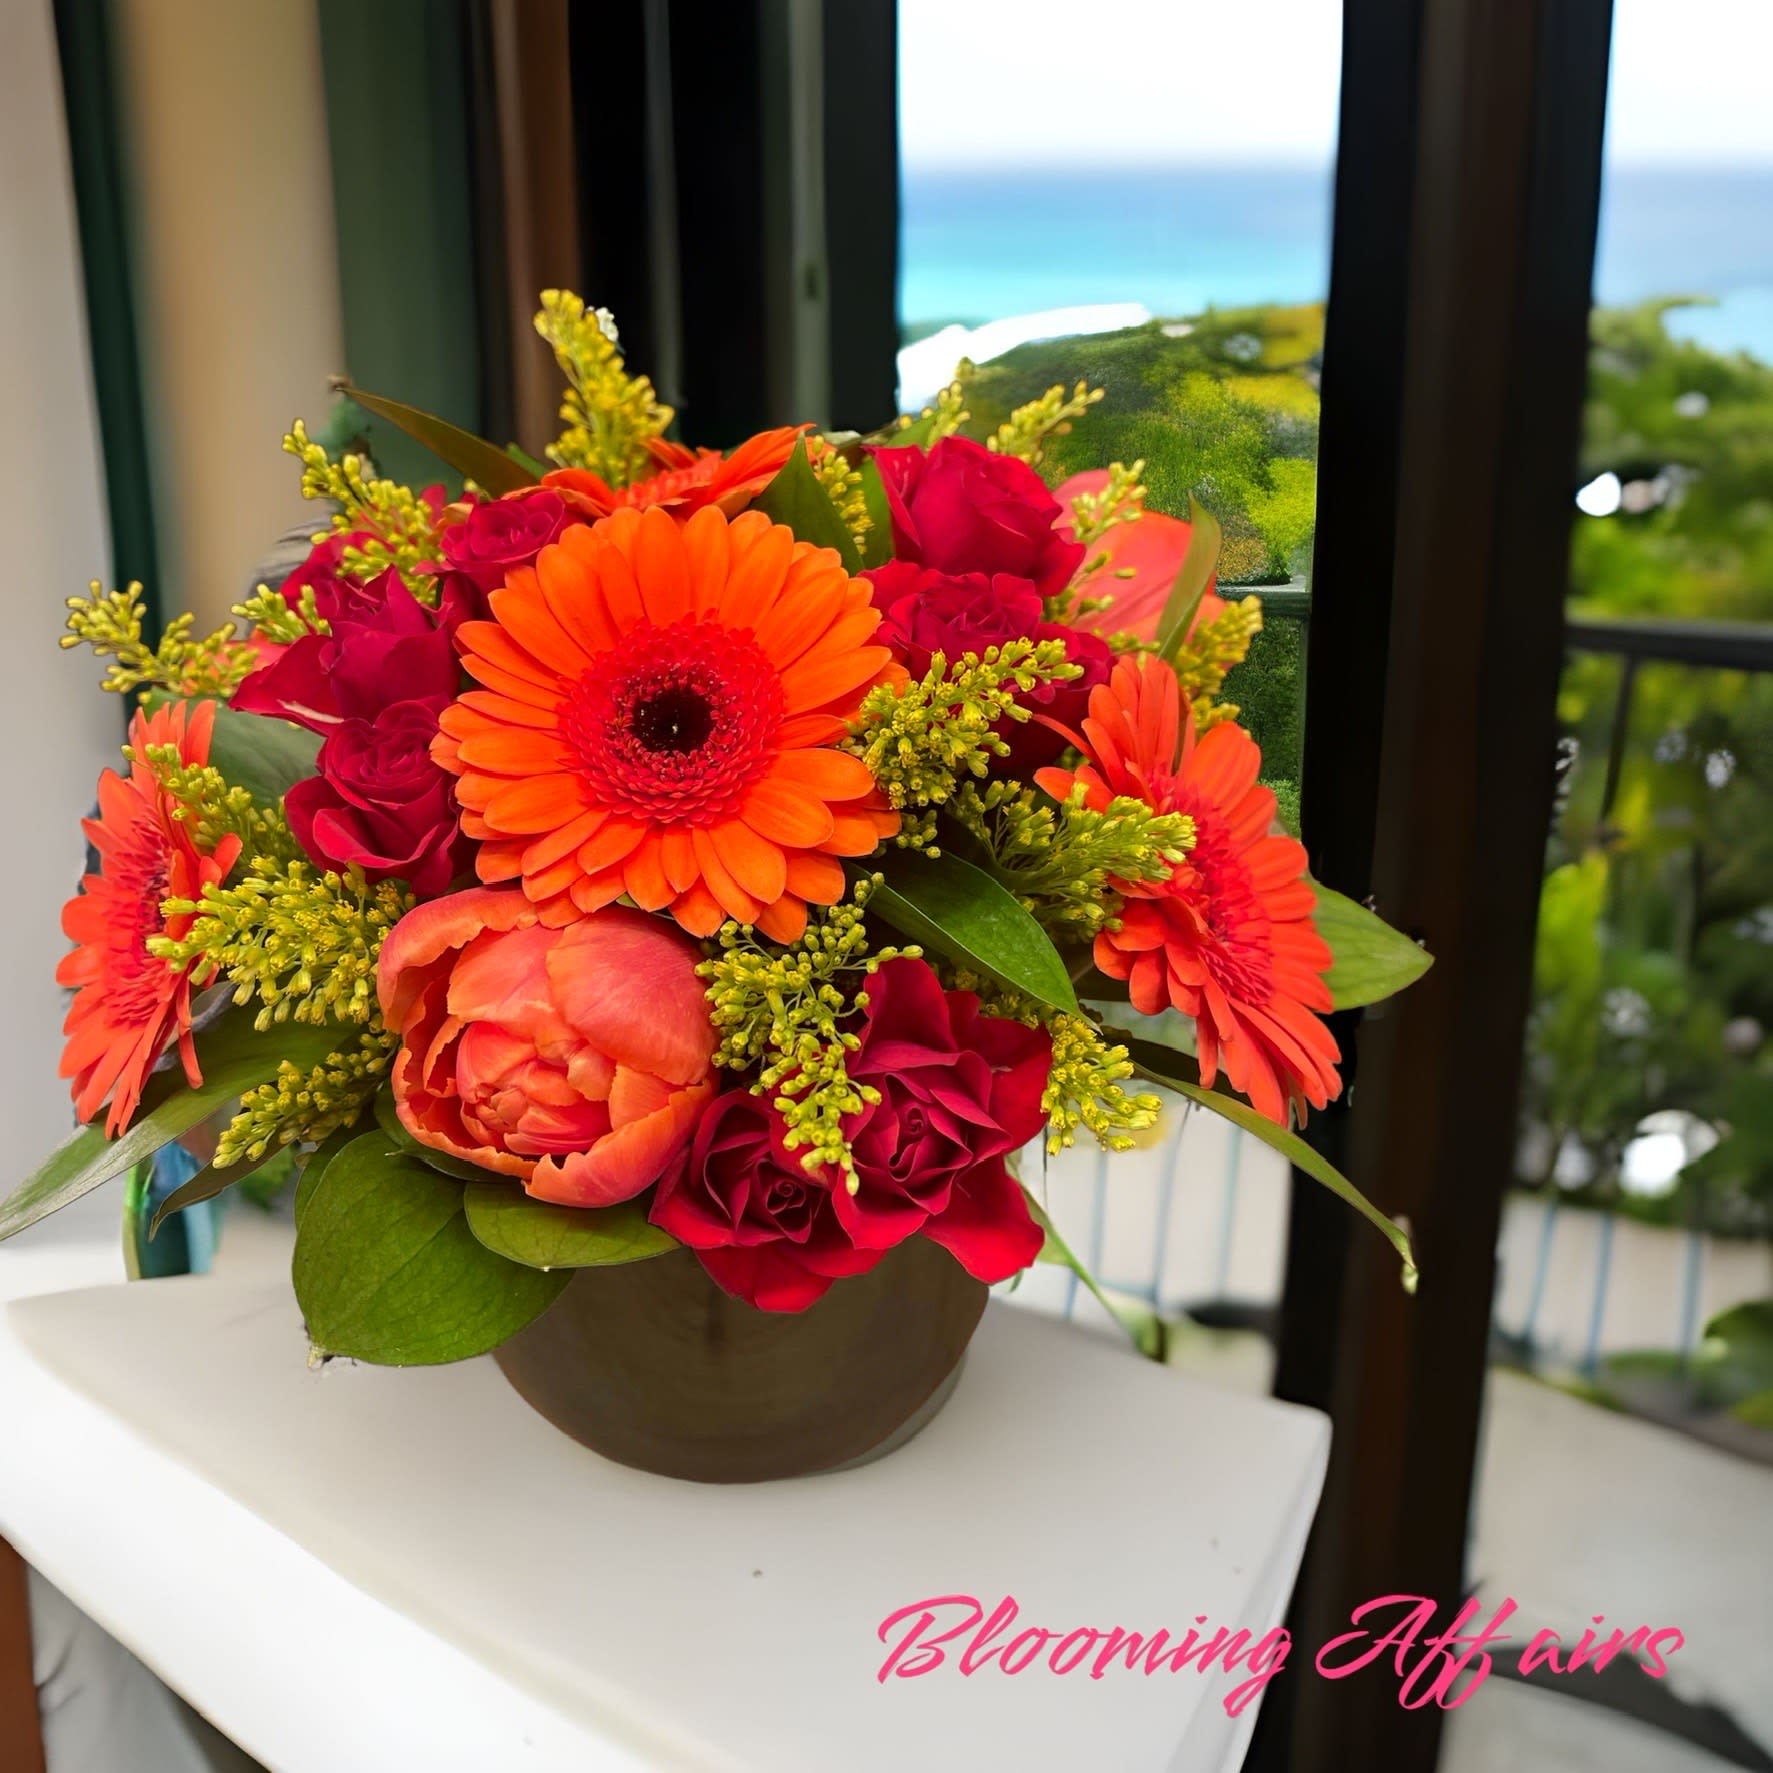 Bloom0417 - Gerbera Daises, Spray Roses,Tulips, Solidago, and Roses in a vase